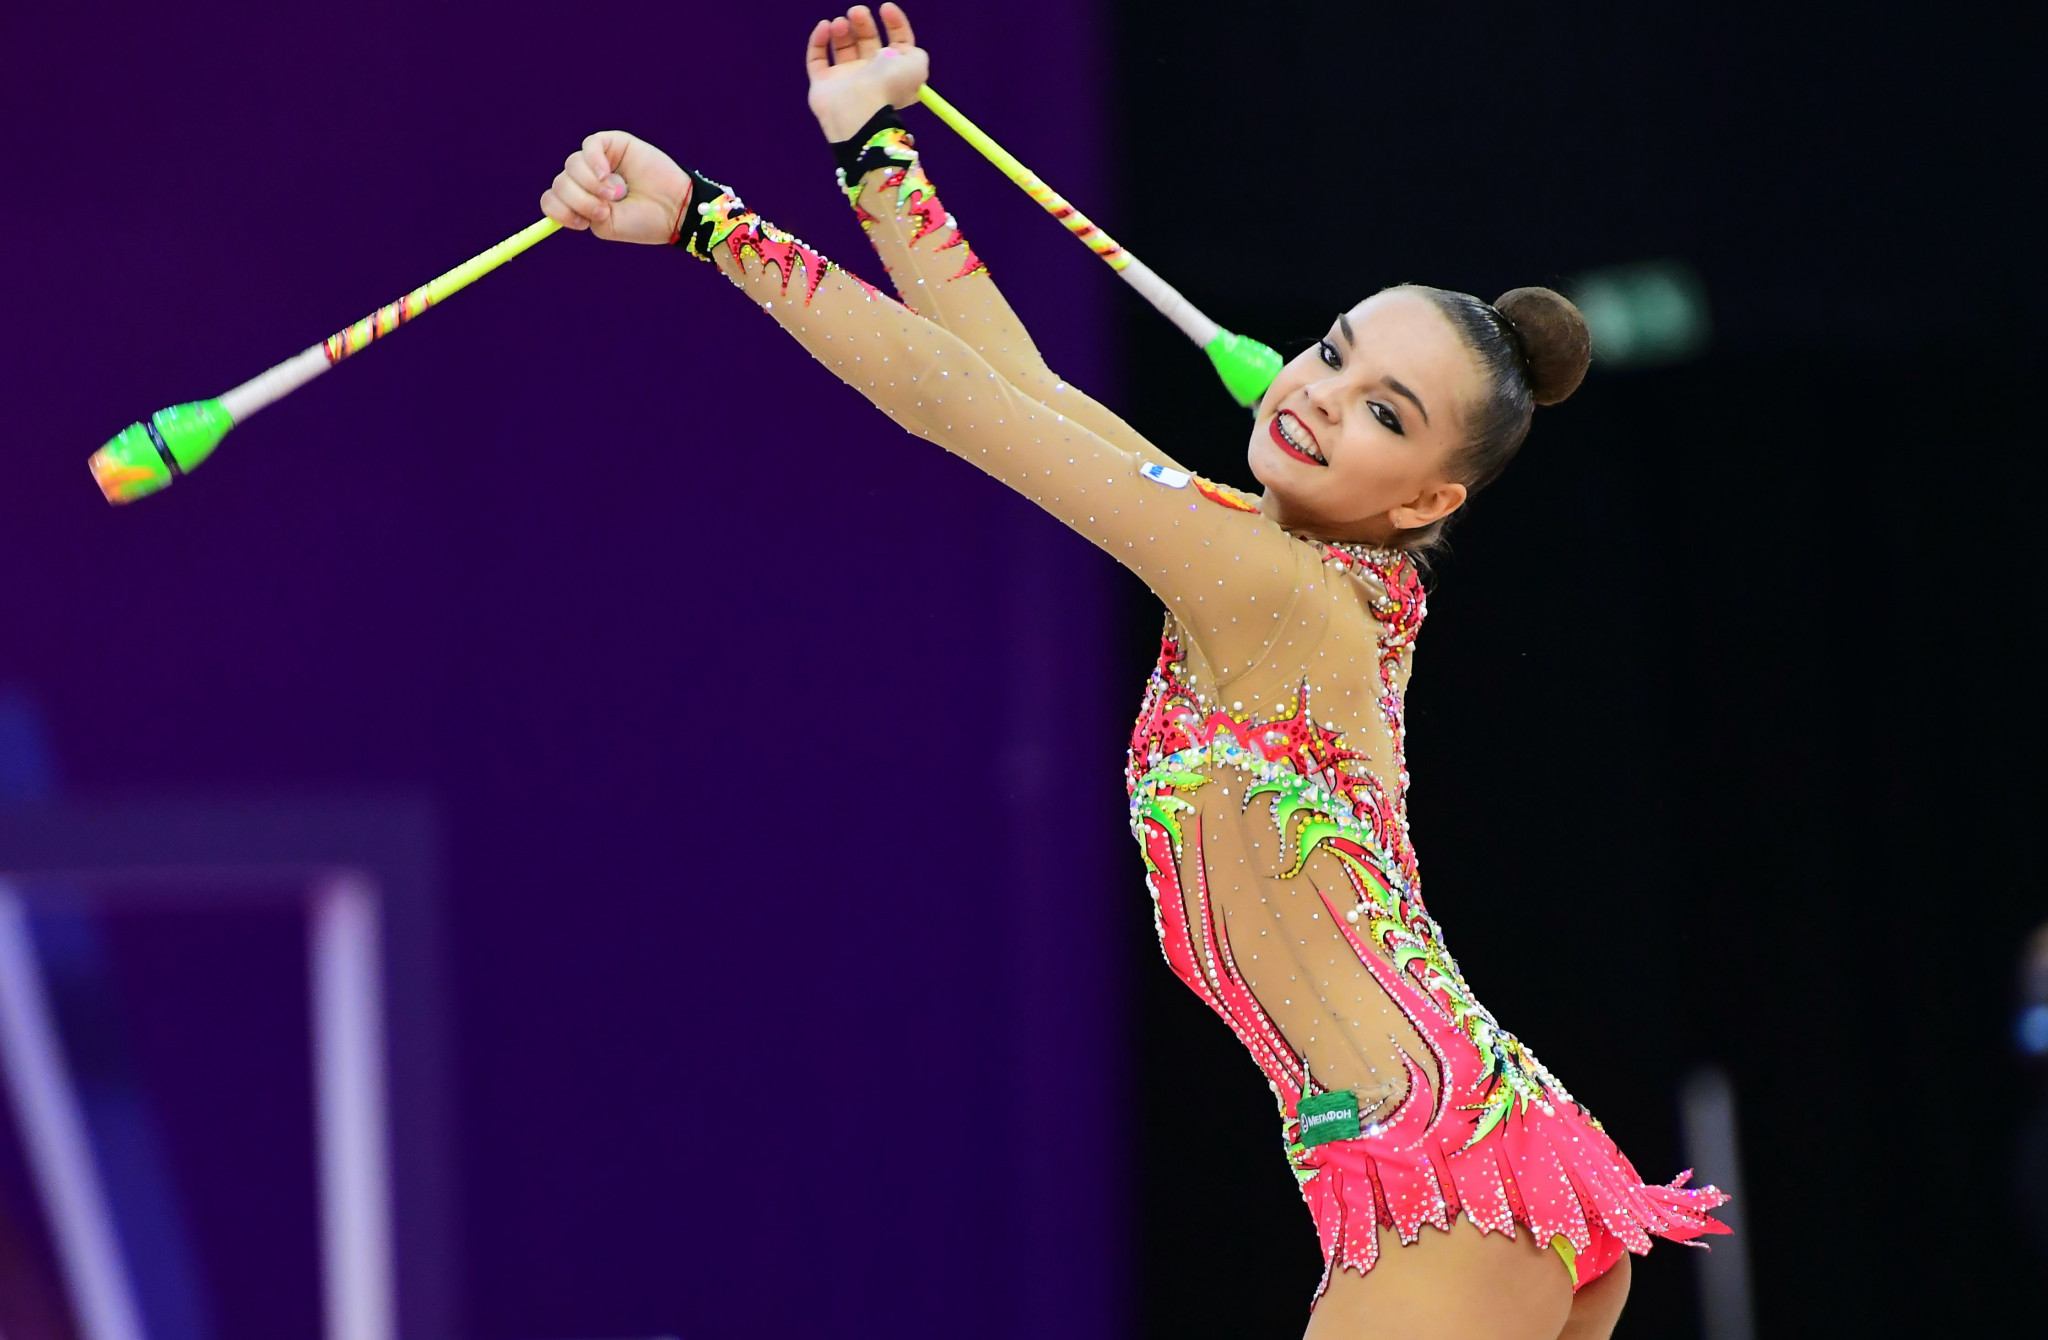 Dina Averina goes in search of more gold at Rhythmic Gymnastics World Championships